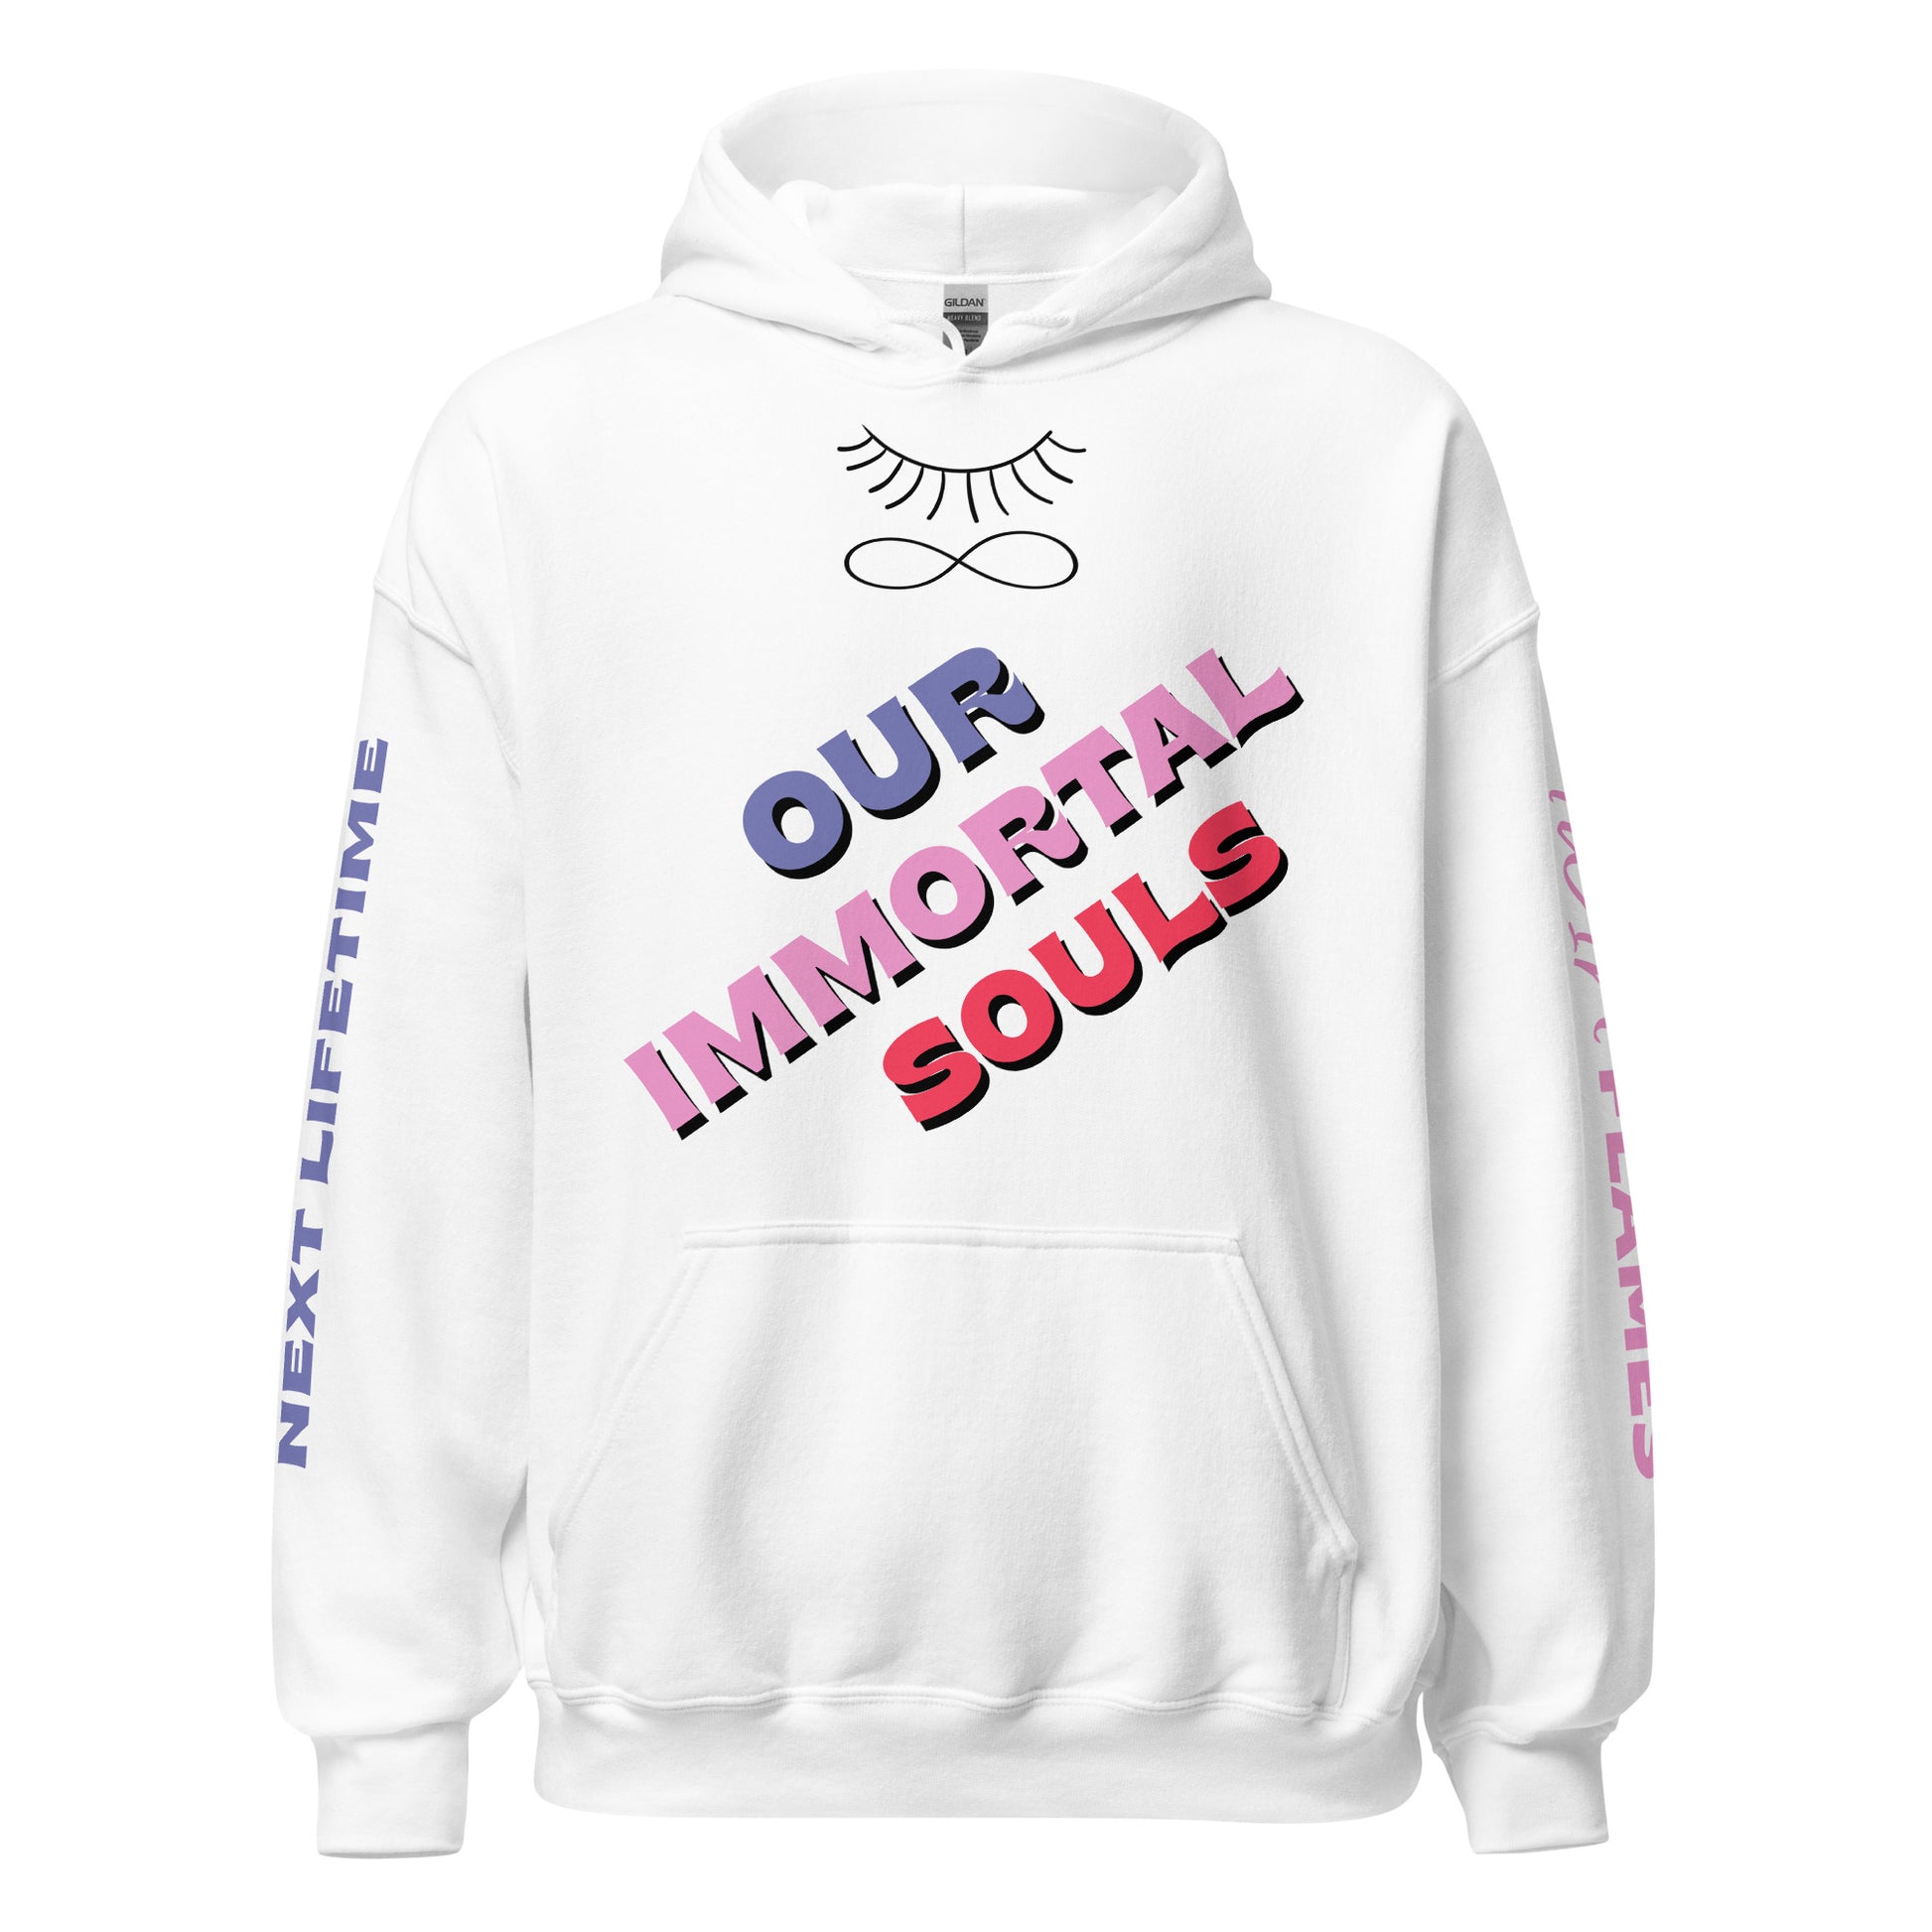 White unisex graphic hoodies for women and for men. Custom text hoodie with words and logo on the front/back/sleeves. Hoodies with black closed eye/infinity sign logo with bluish, lavenderish, pinkish/redish colorful "OUR IMMORTAL SOULS" text design on front. Oversized hoodies: Sizes 5X, 4X, 3X, 2X. Hoodies for adults XL, L, M, and S. Sweatshirts with double-lined hood, matching drawstrings, pouch pocket, rib-knit cuffs and cotton/polyester blend. JAMILLIAH'S WISDOM IS TIMELESS SHOP - wisdomistimeless.com.